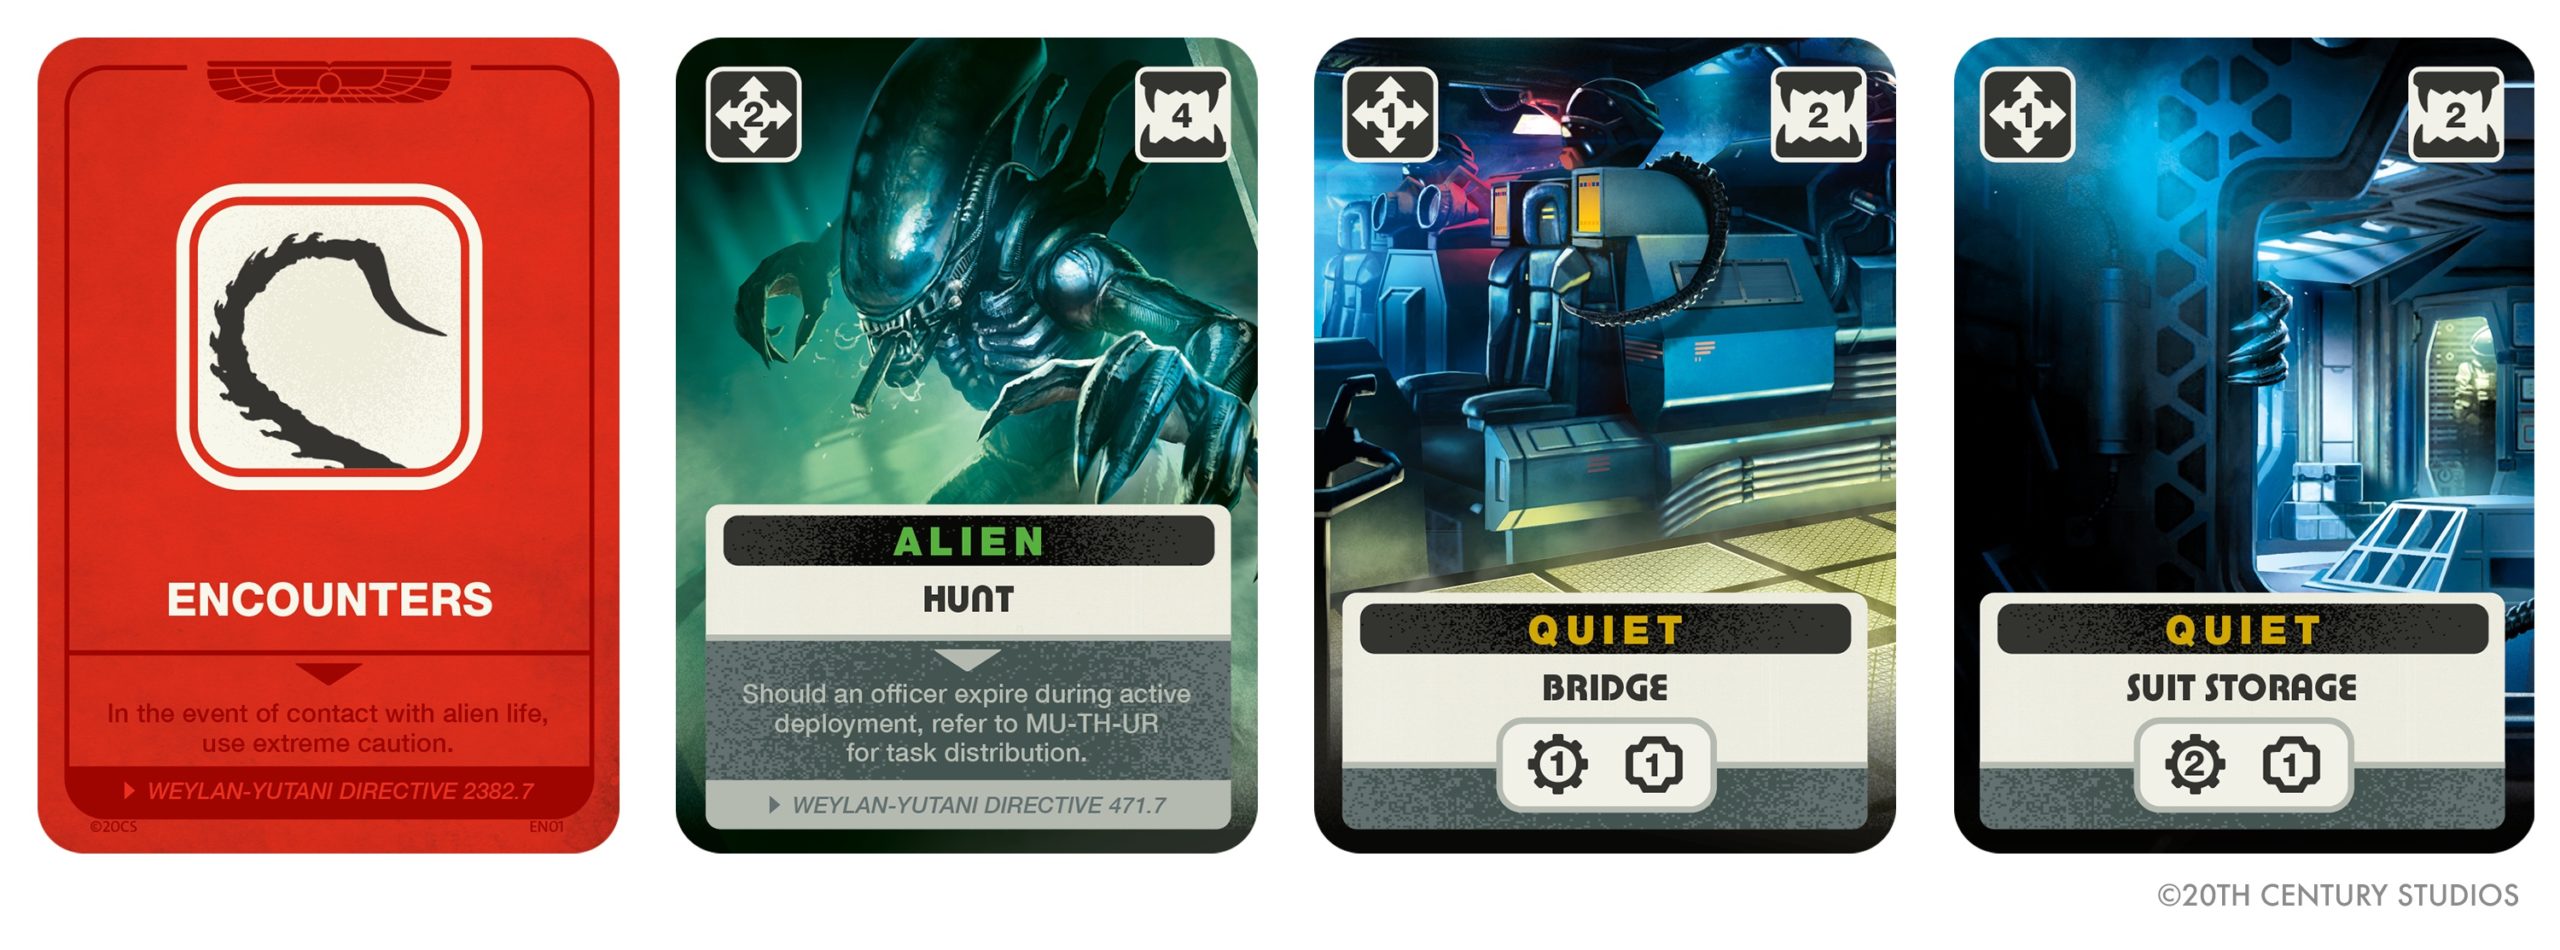 Encounter cards drive some of your showdowns with the alien. (Image: 20th Century/Ravensburger)